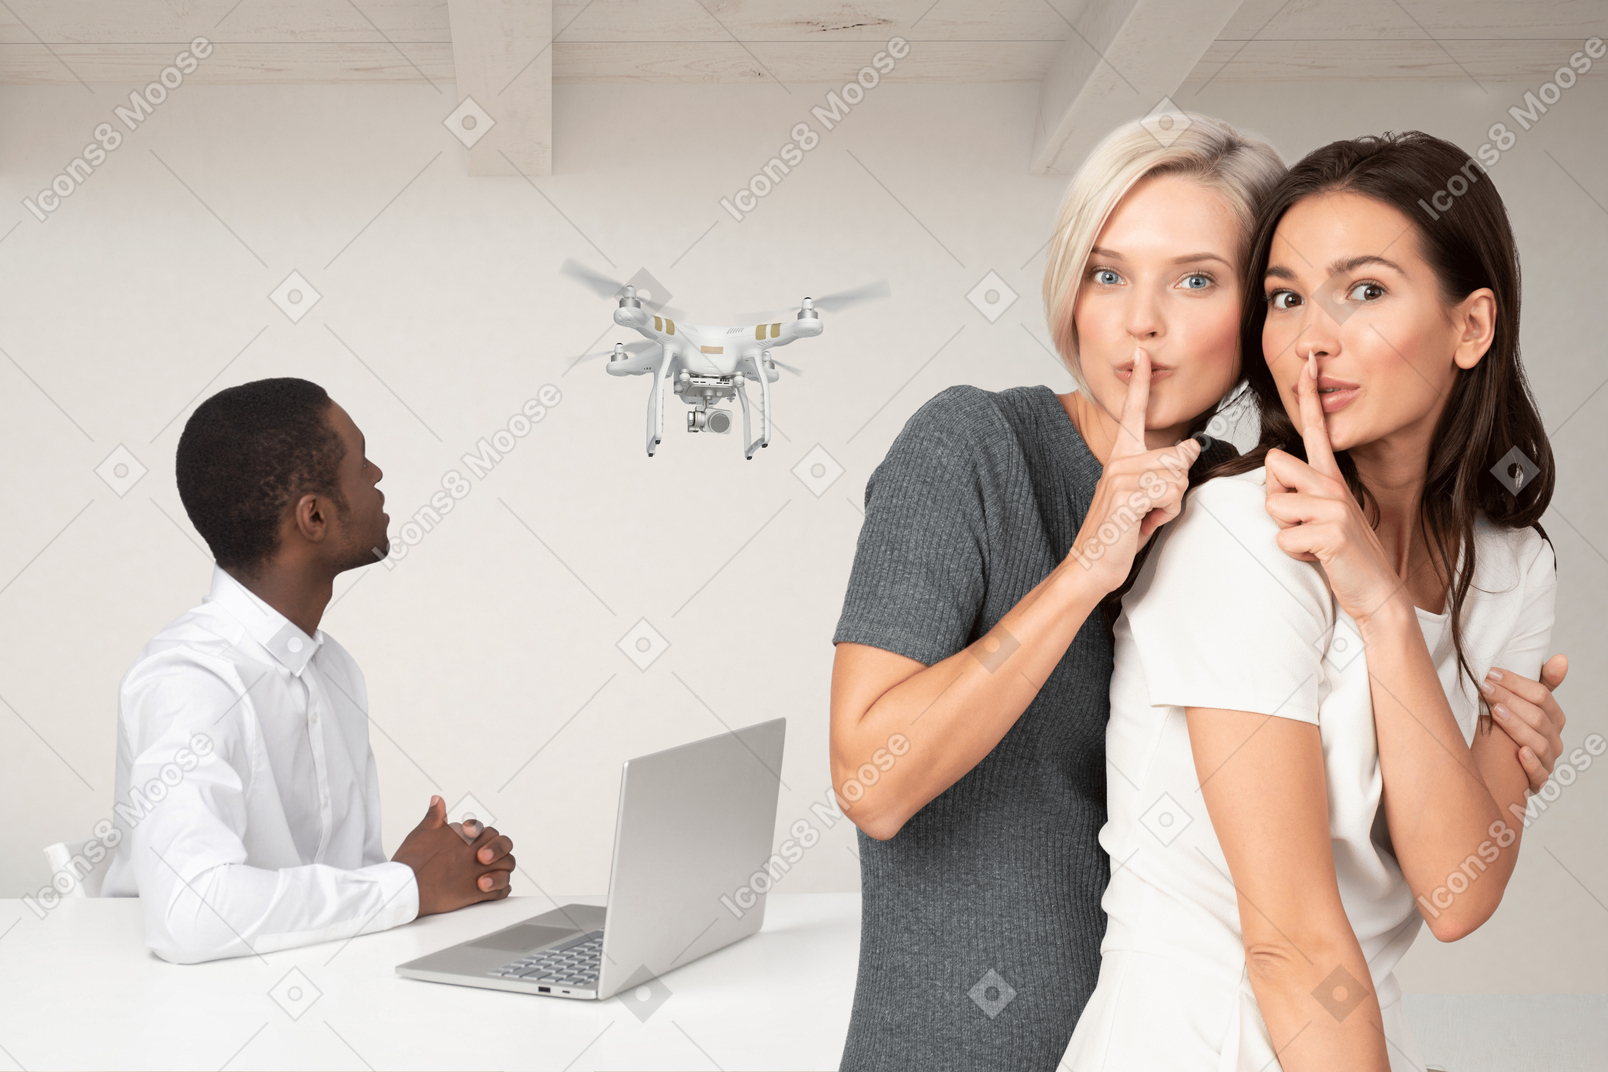 Blonde and brunette secretly watching an afro man with a drone